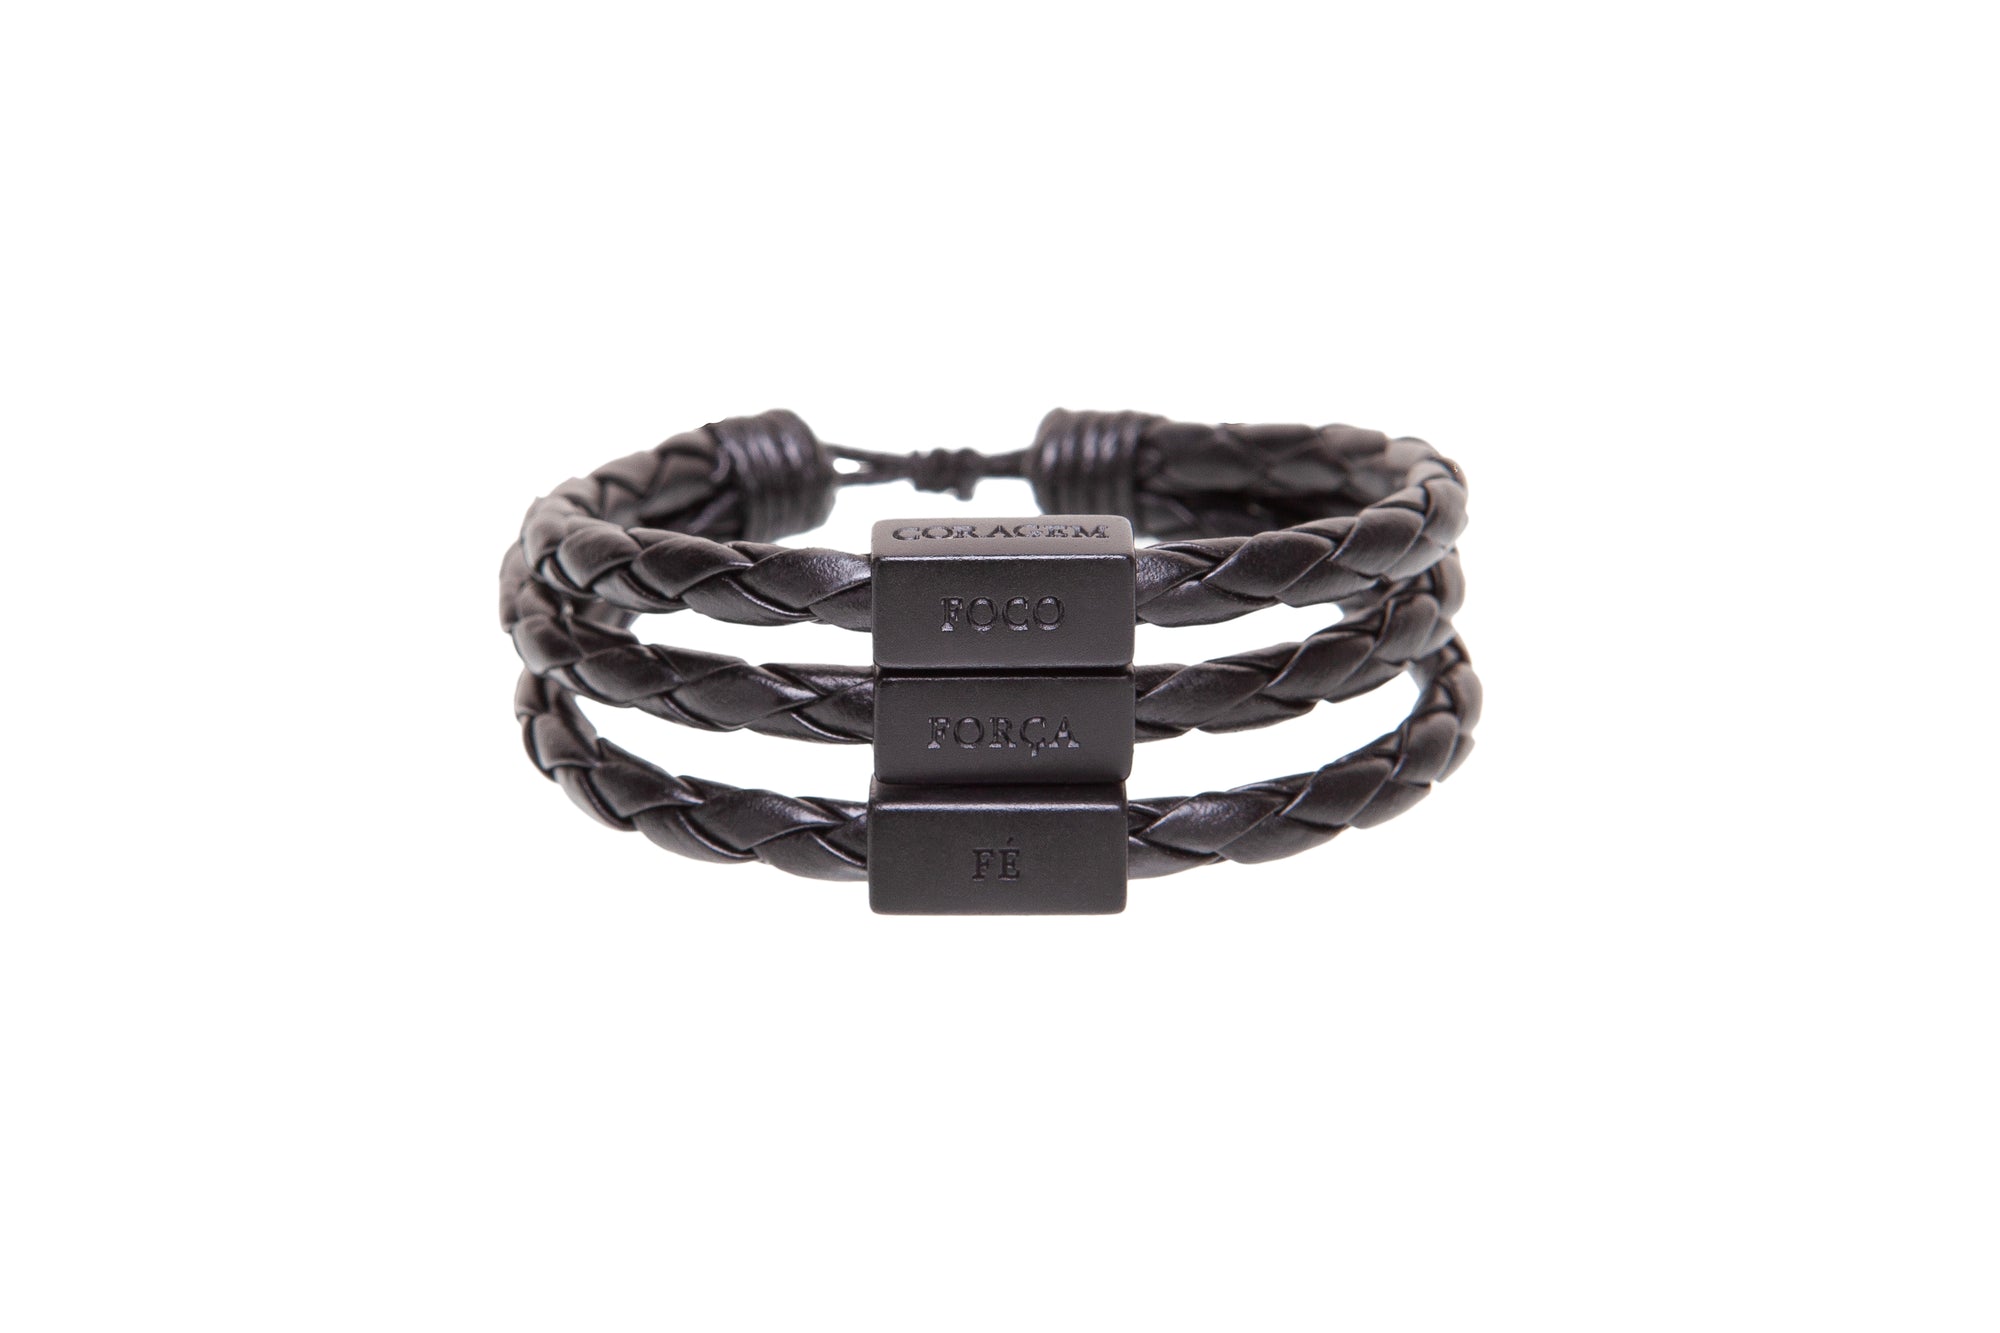 Men's Bracelet Black Leather Silver Adjustable with words of Focus, Strength, Faith, & Courage in Portuguese - Unisex Man's Bracelet - Male Jewelry